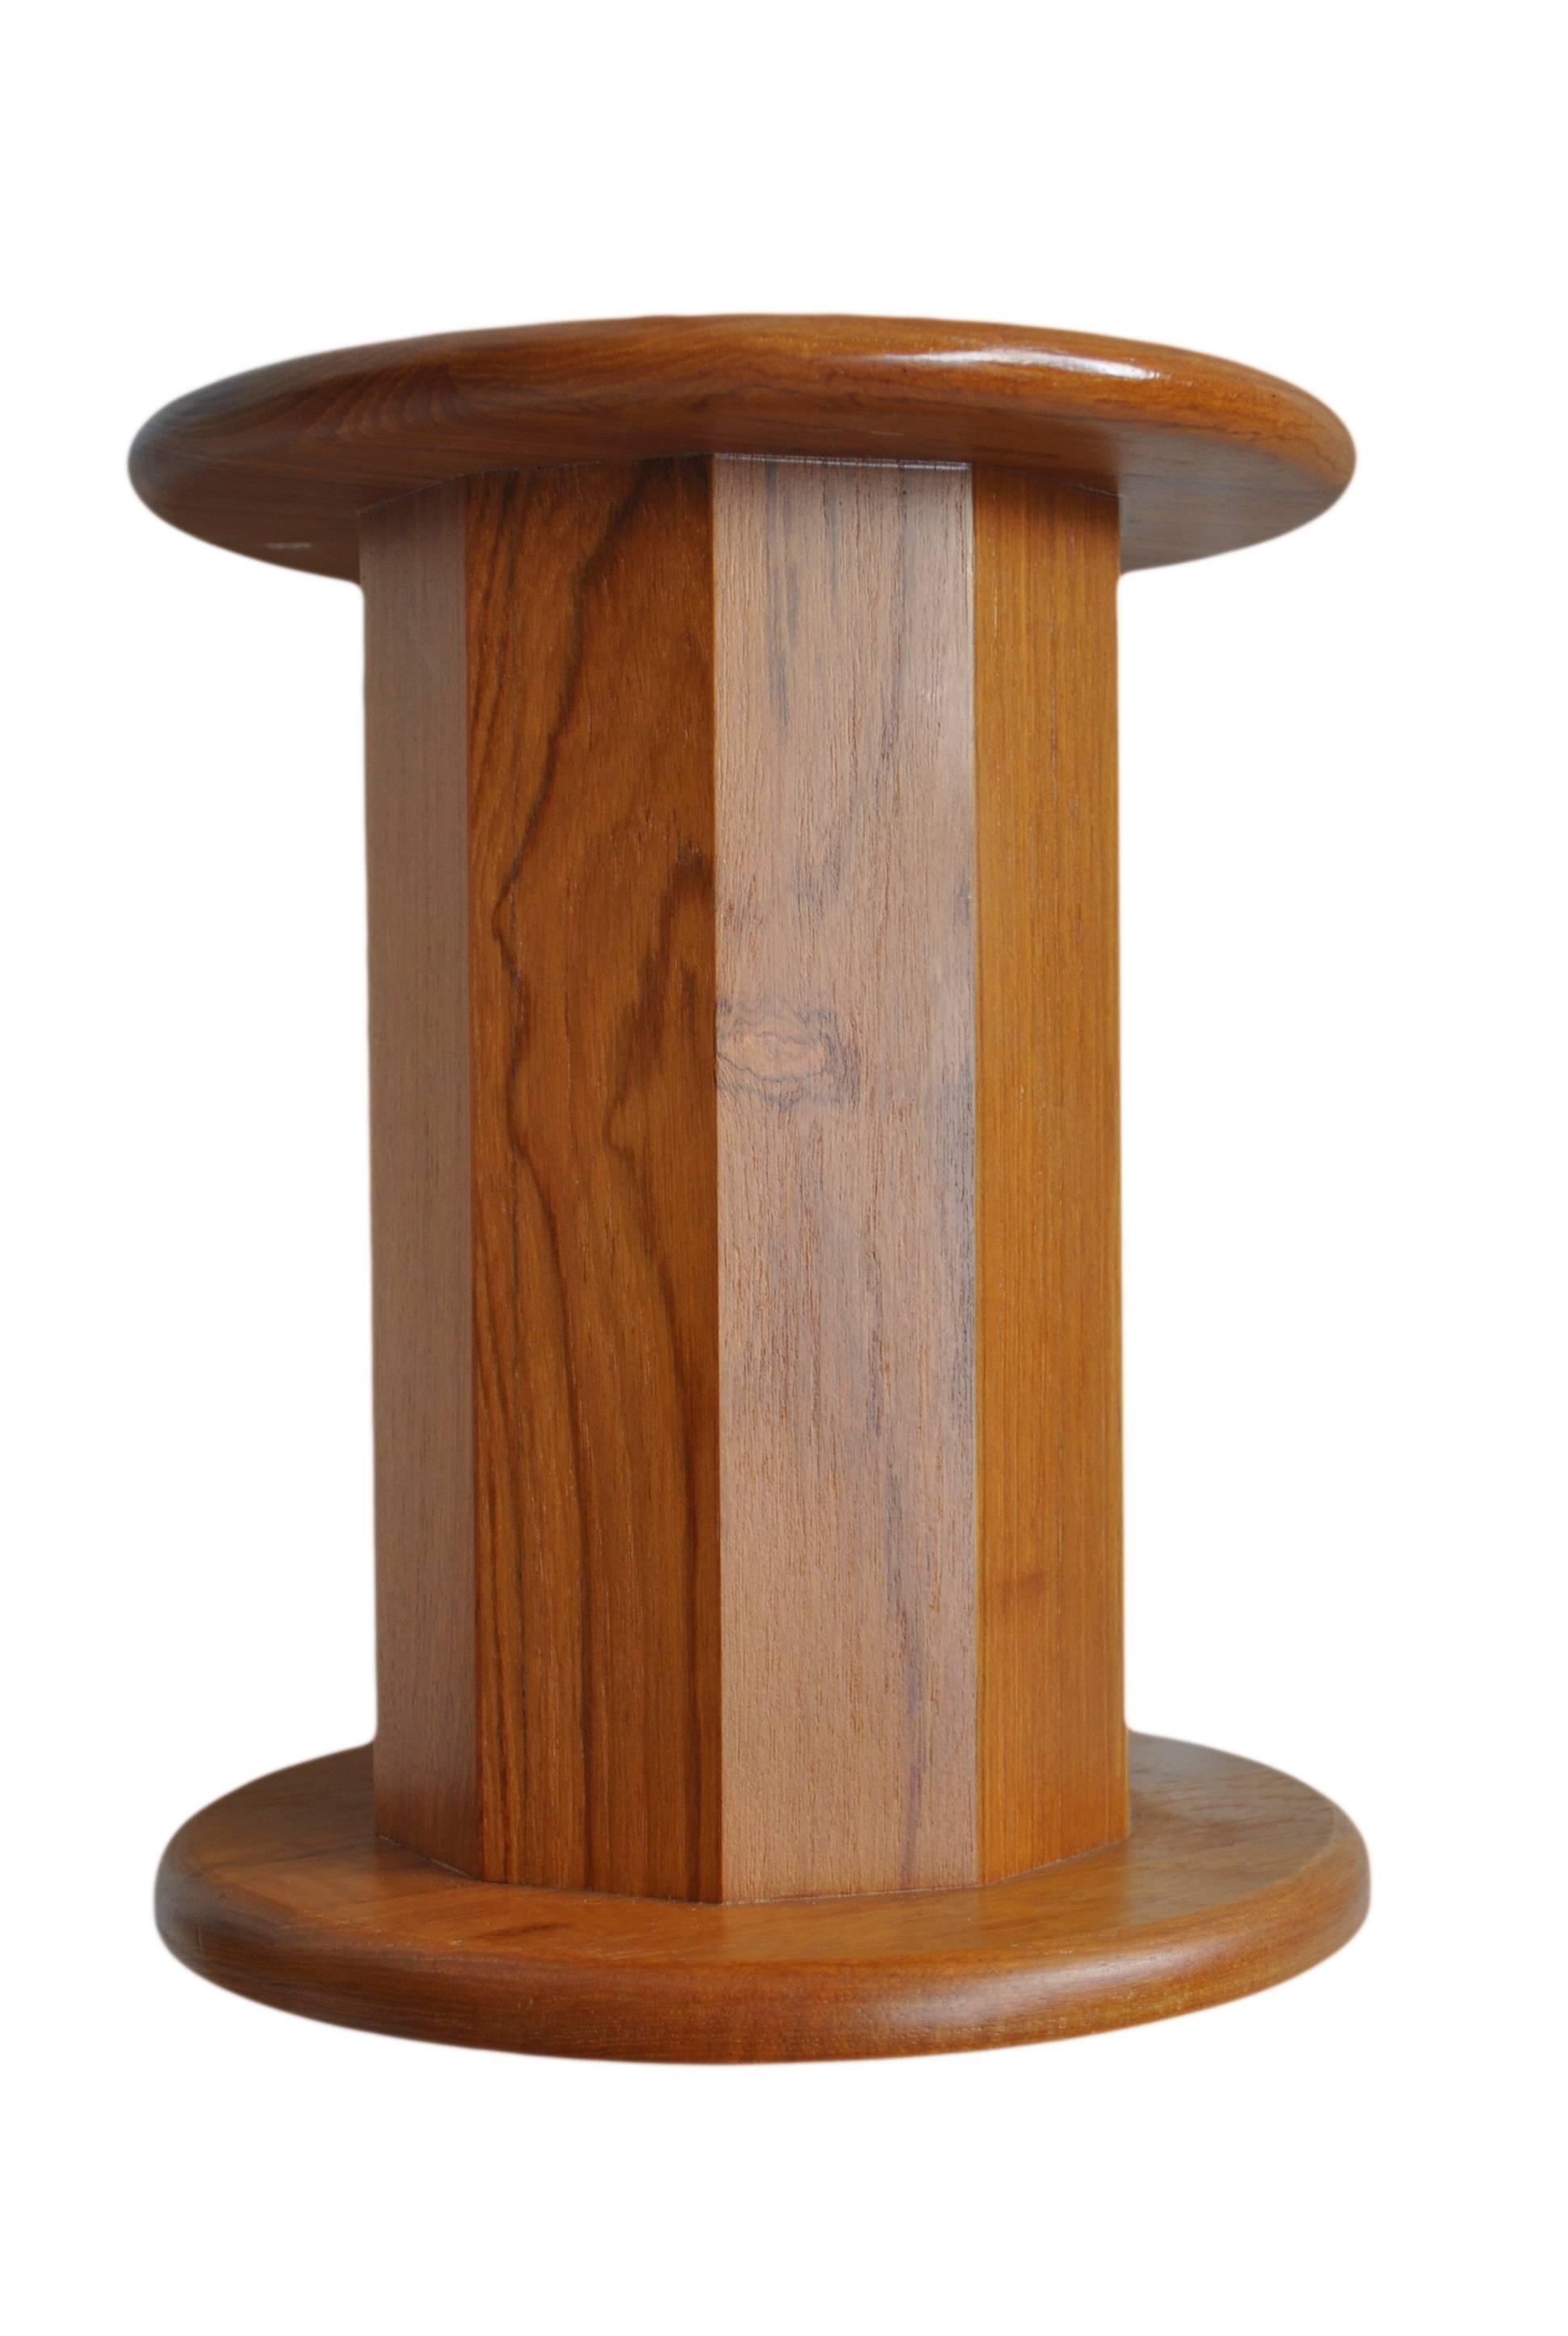 Unique pair of Danish Mid-Century pedestals, circa 1960. Constructed from teak. Can be used in a variety of ways as tables, nightstands or stools.
Very nicely crafted.